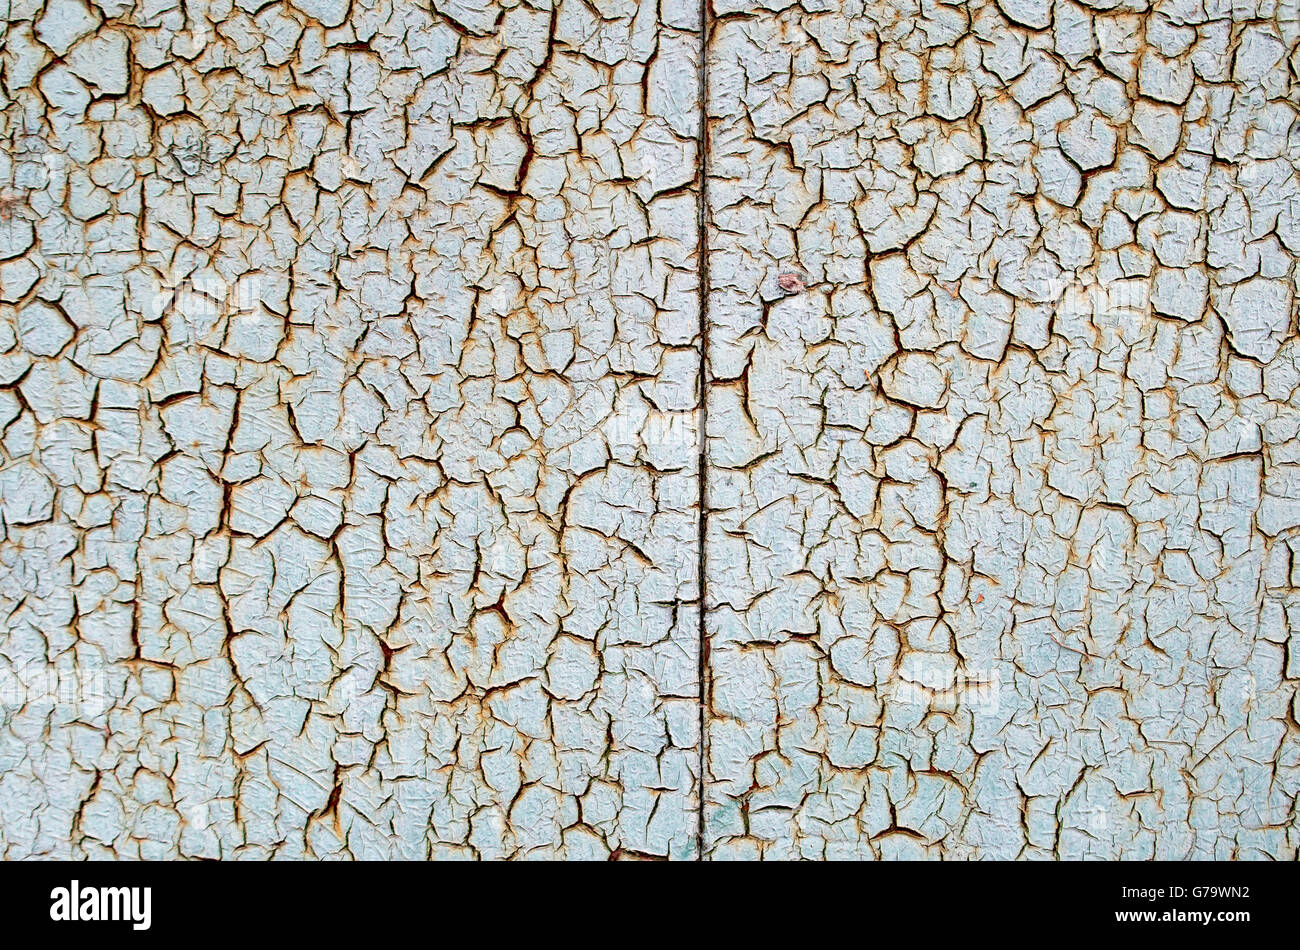 Rusty metal surface is covered with a thick layer of paint which has cracked from age to use as a background. Stock Photo